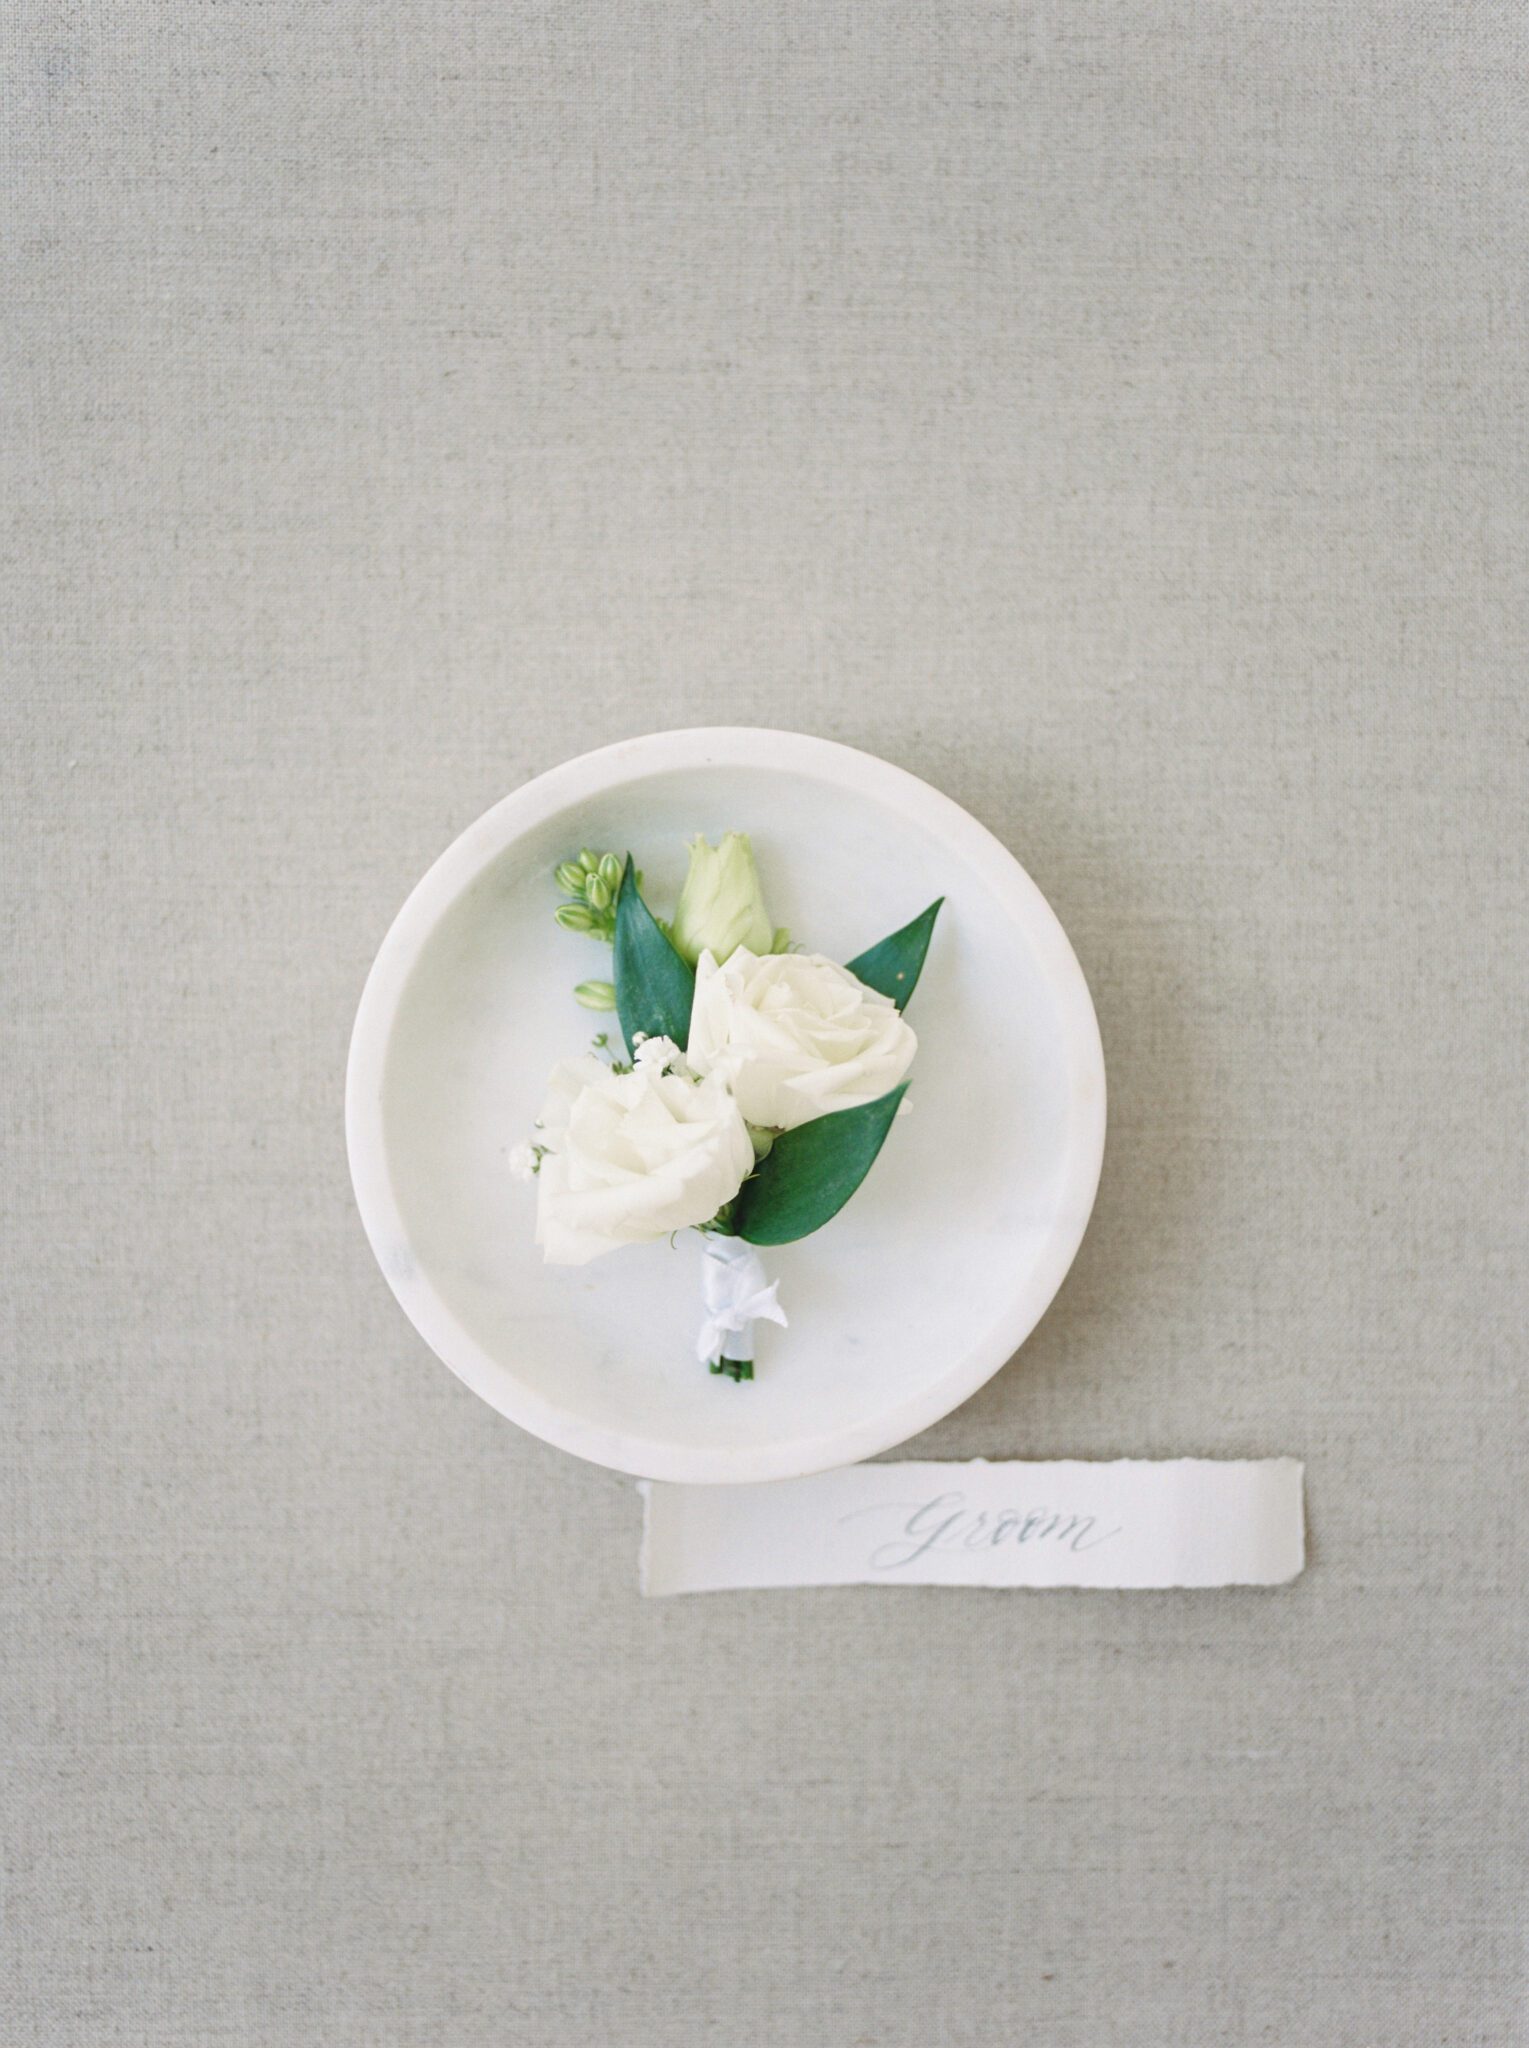 Classic white rose groom boutonniere from Lovella Lifestyle.